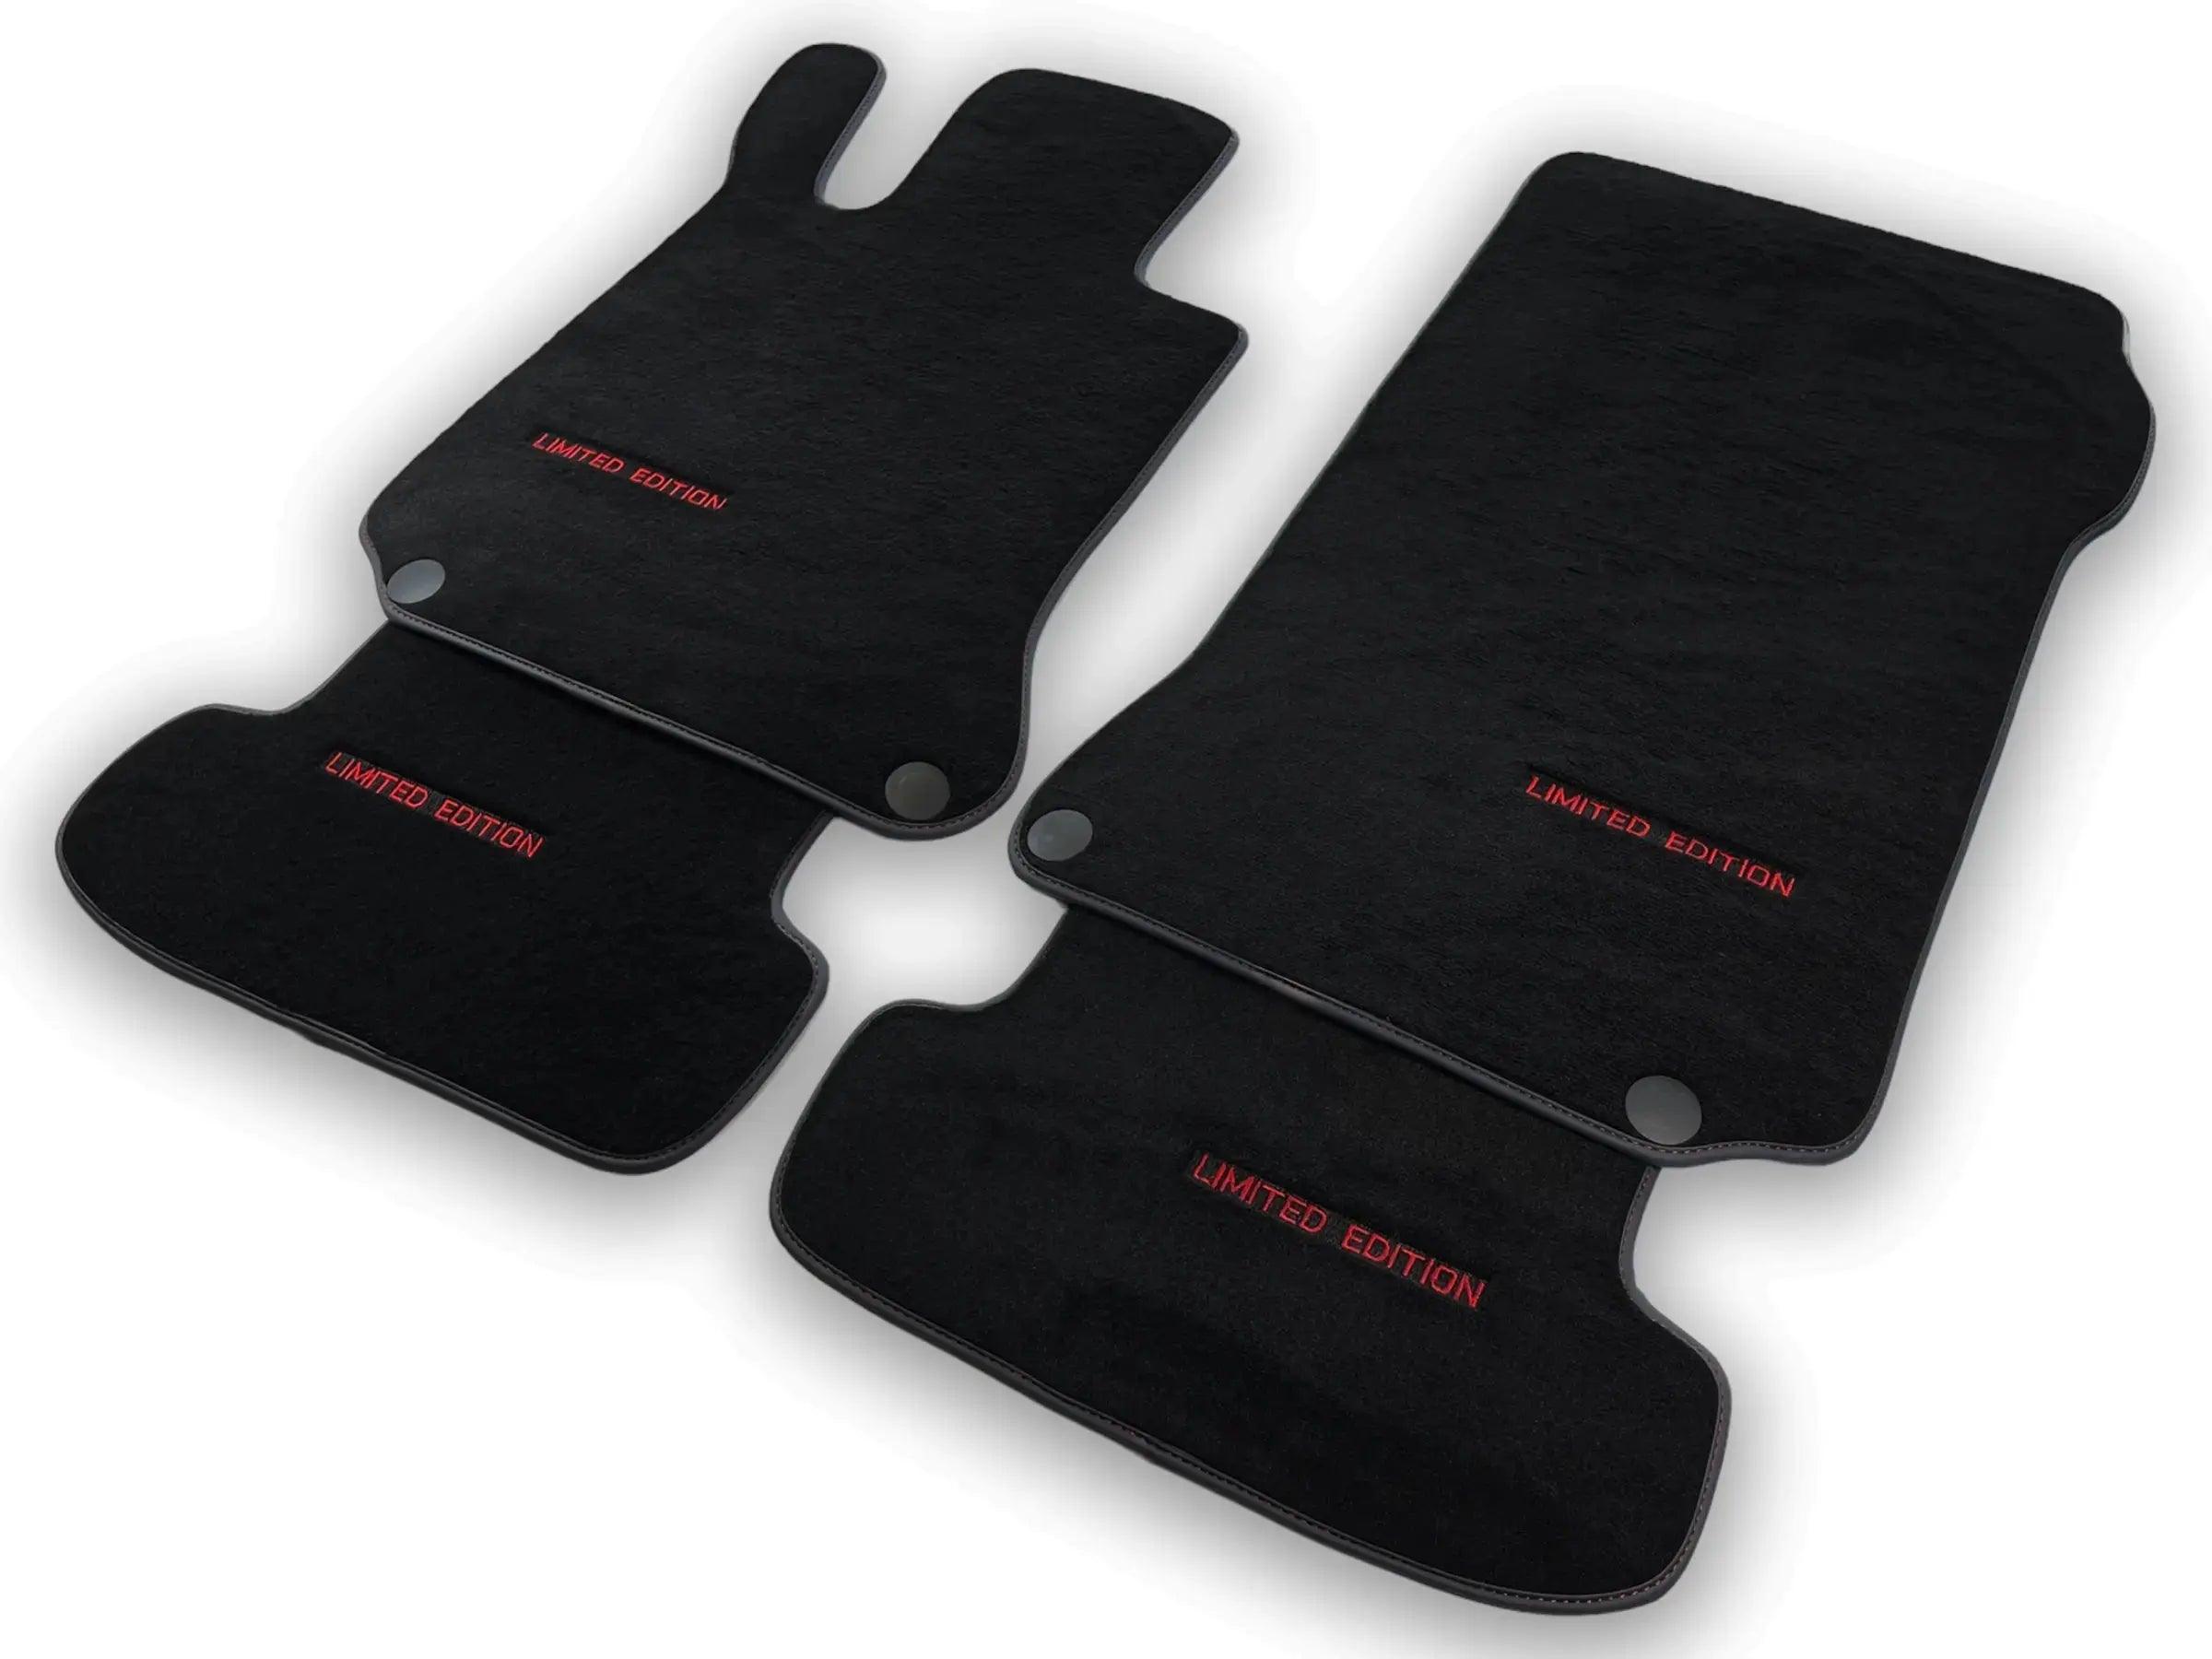 Black Floor Mats For Mercedes Benz E-Class C207 Coupe Facelift (2013-2017) | Limited Edition